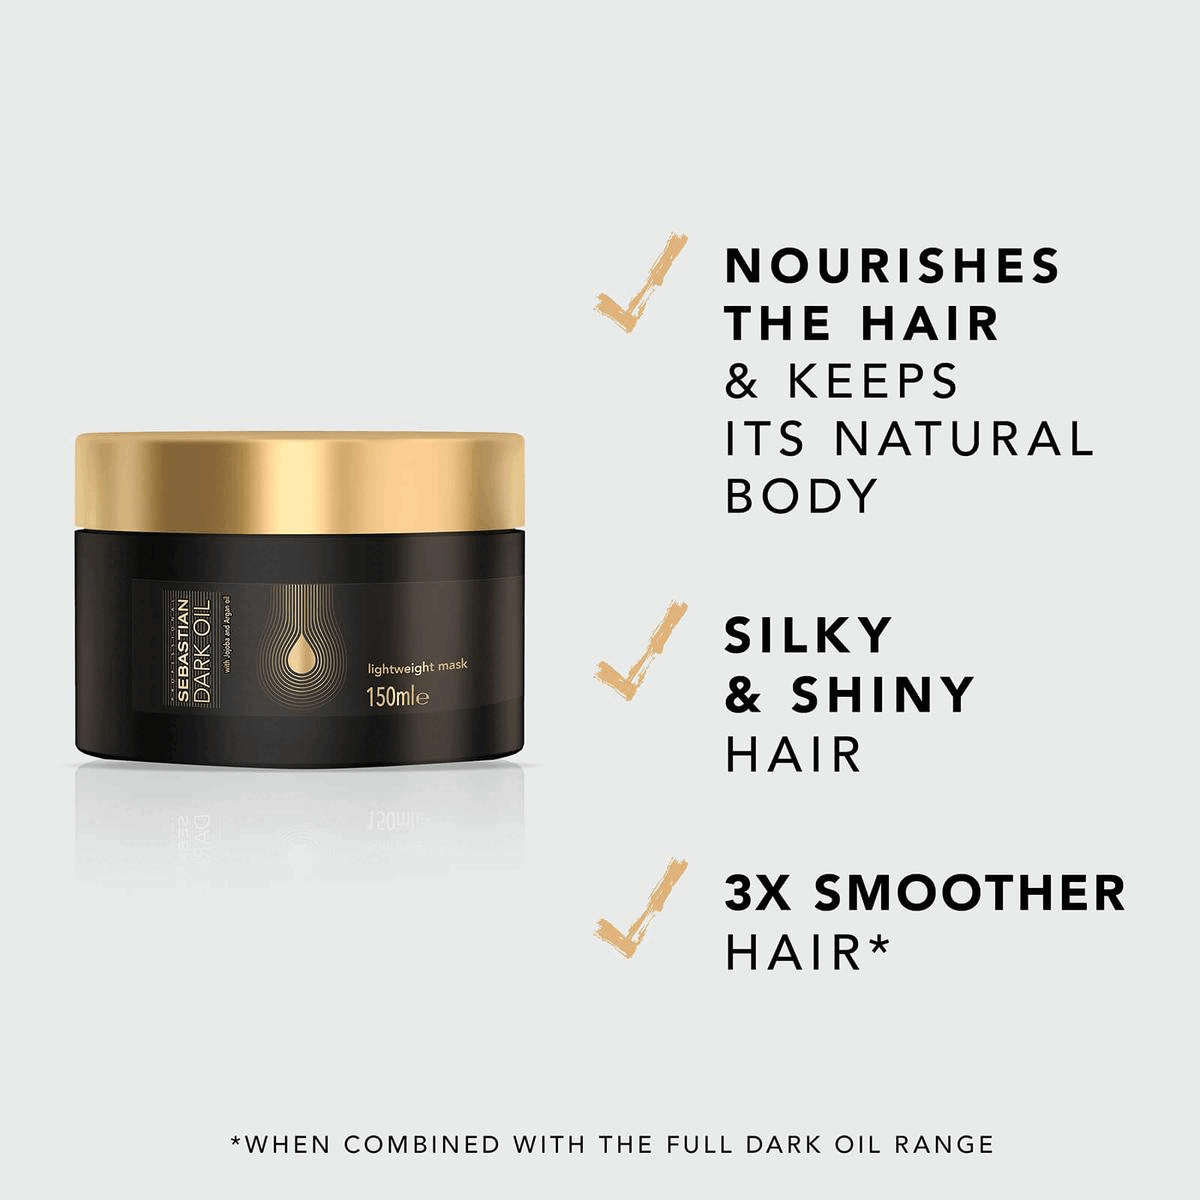 Nourishes the hair & keeps its natural body Silky & shiny hair 3x smoother hair* *when combined with the full dark oil range. How to use Leave on wet hair for 2-5 minutes & rinse. Jojoba & argan oil